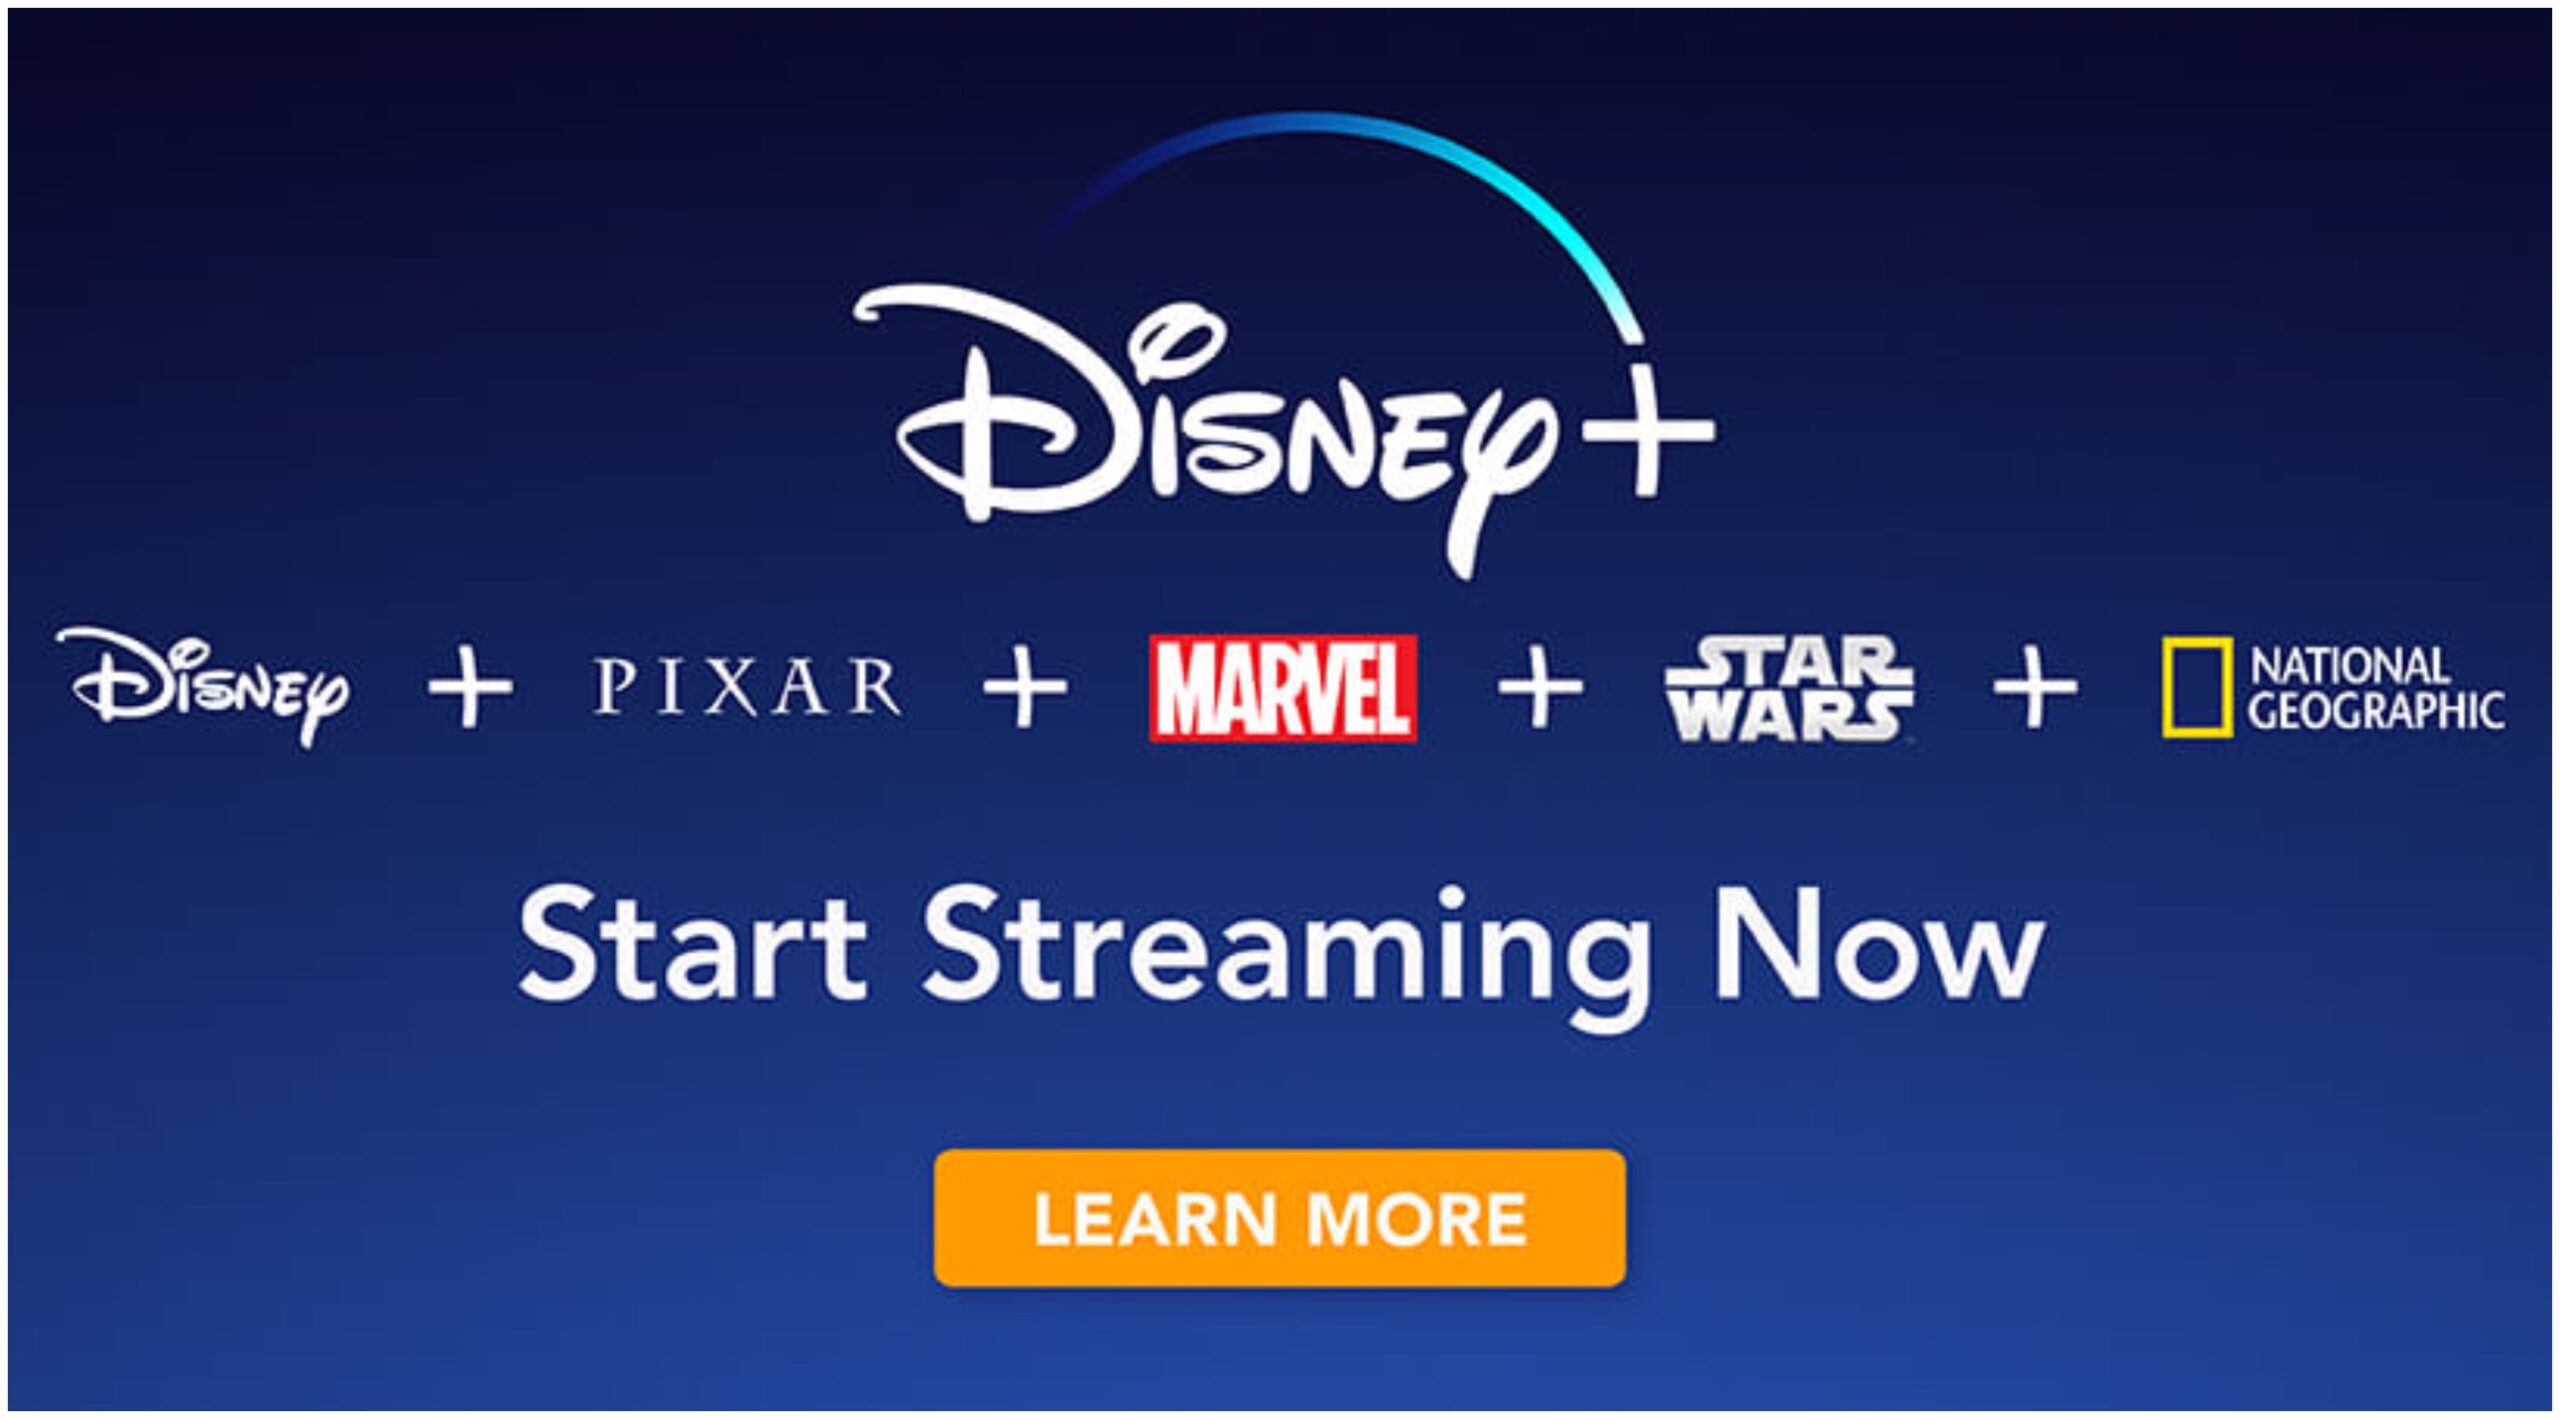 Rumored: Disney+ to Add Adult Content from Fox and Touchstone to Streaming Library